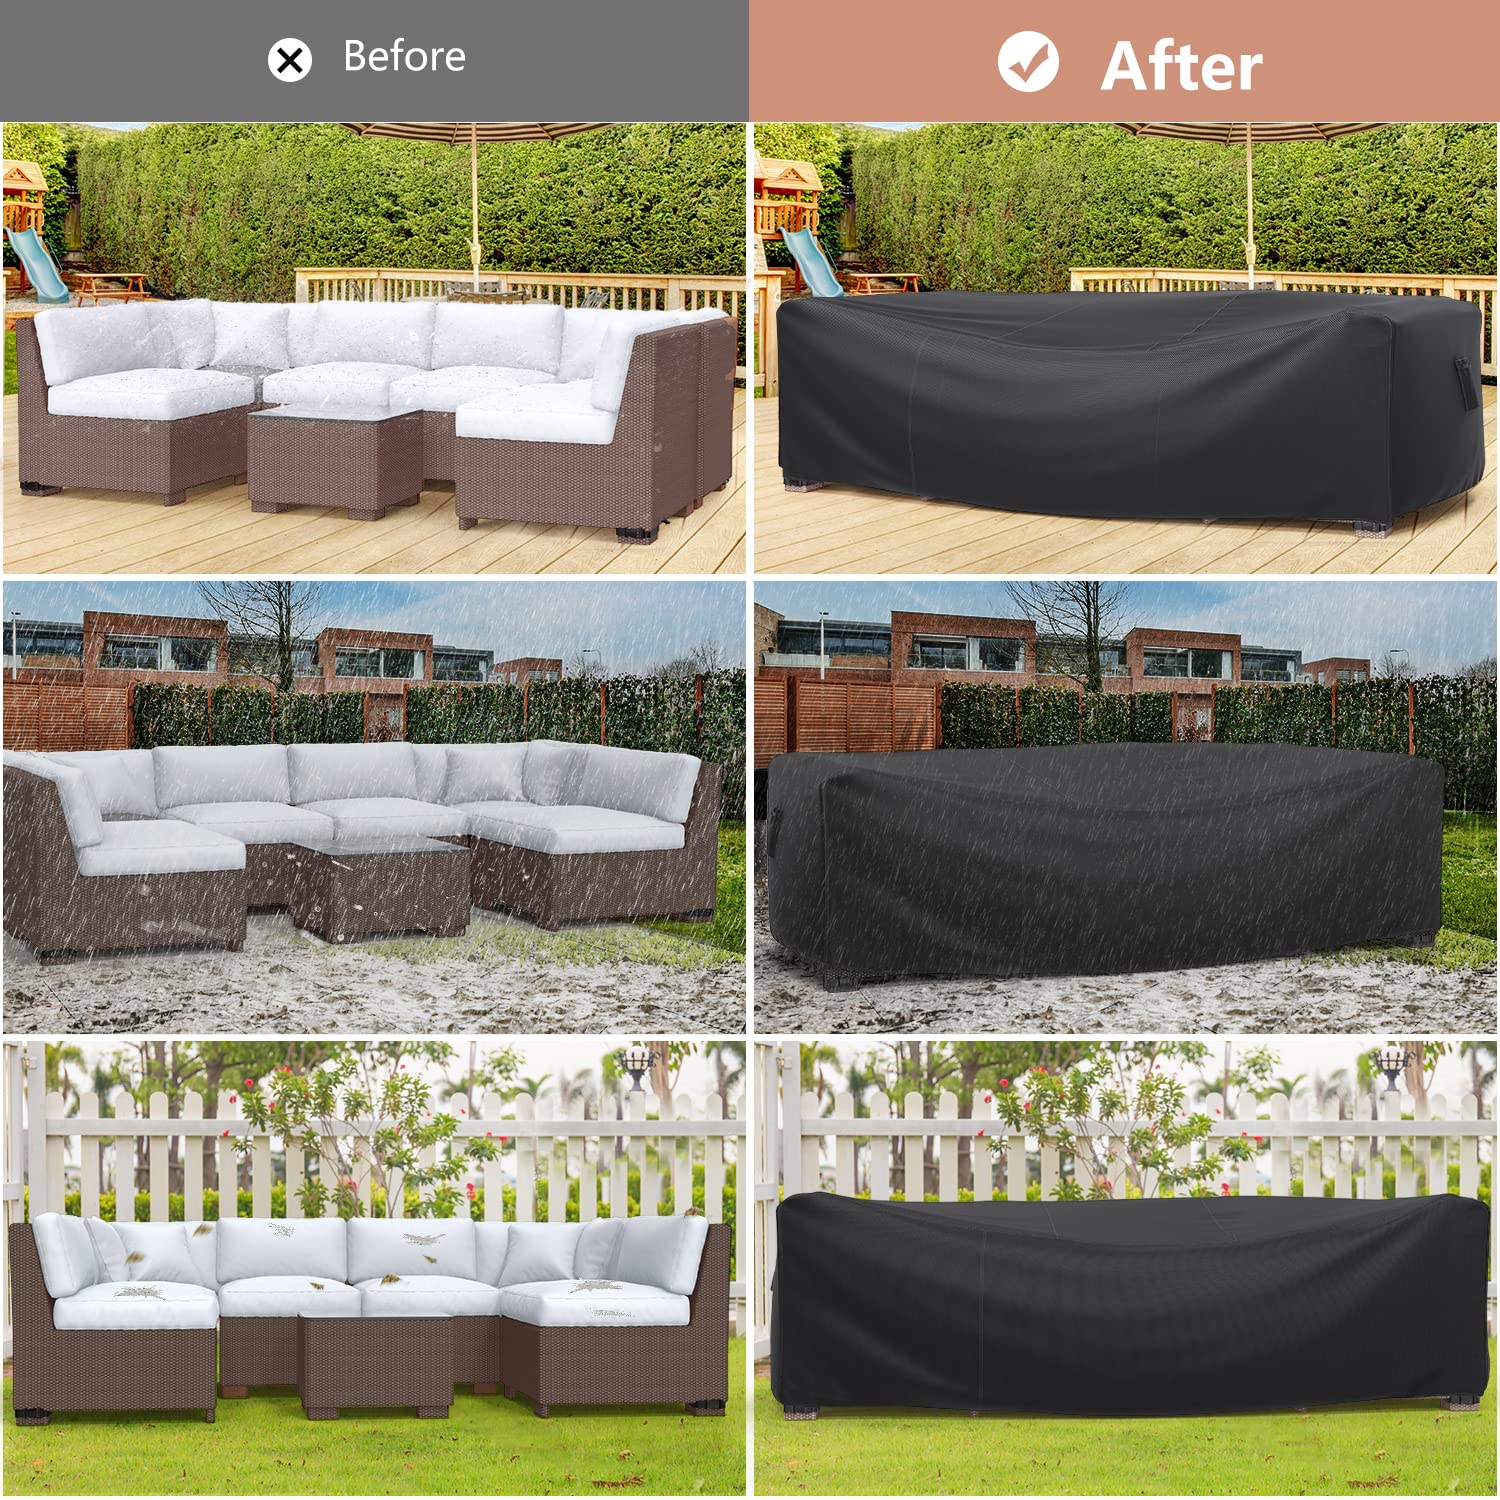 Patio Furniture Set Cover Waterproof, Mrrihand Outdoor Sectional Sofa Set Cover Heavy Duty 600D Table and Chair Set Cover 107" L×81" W×27.9" H